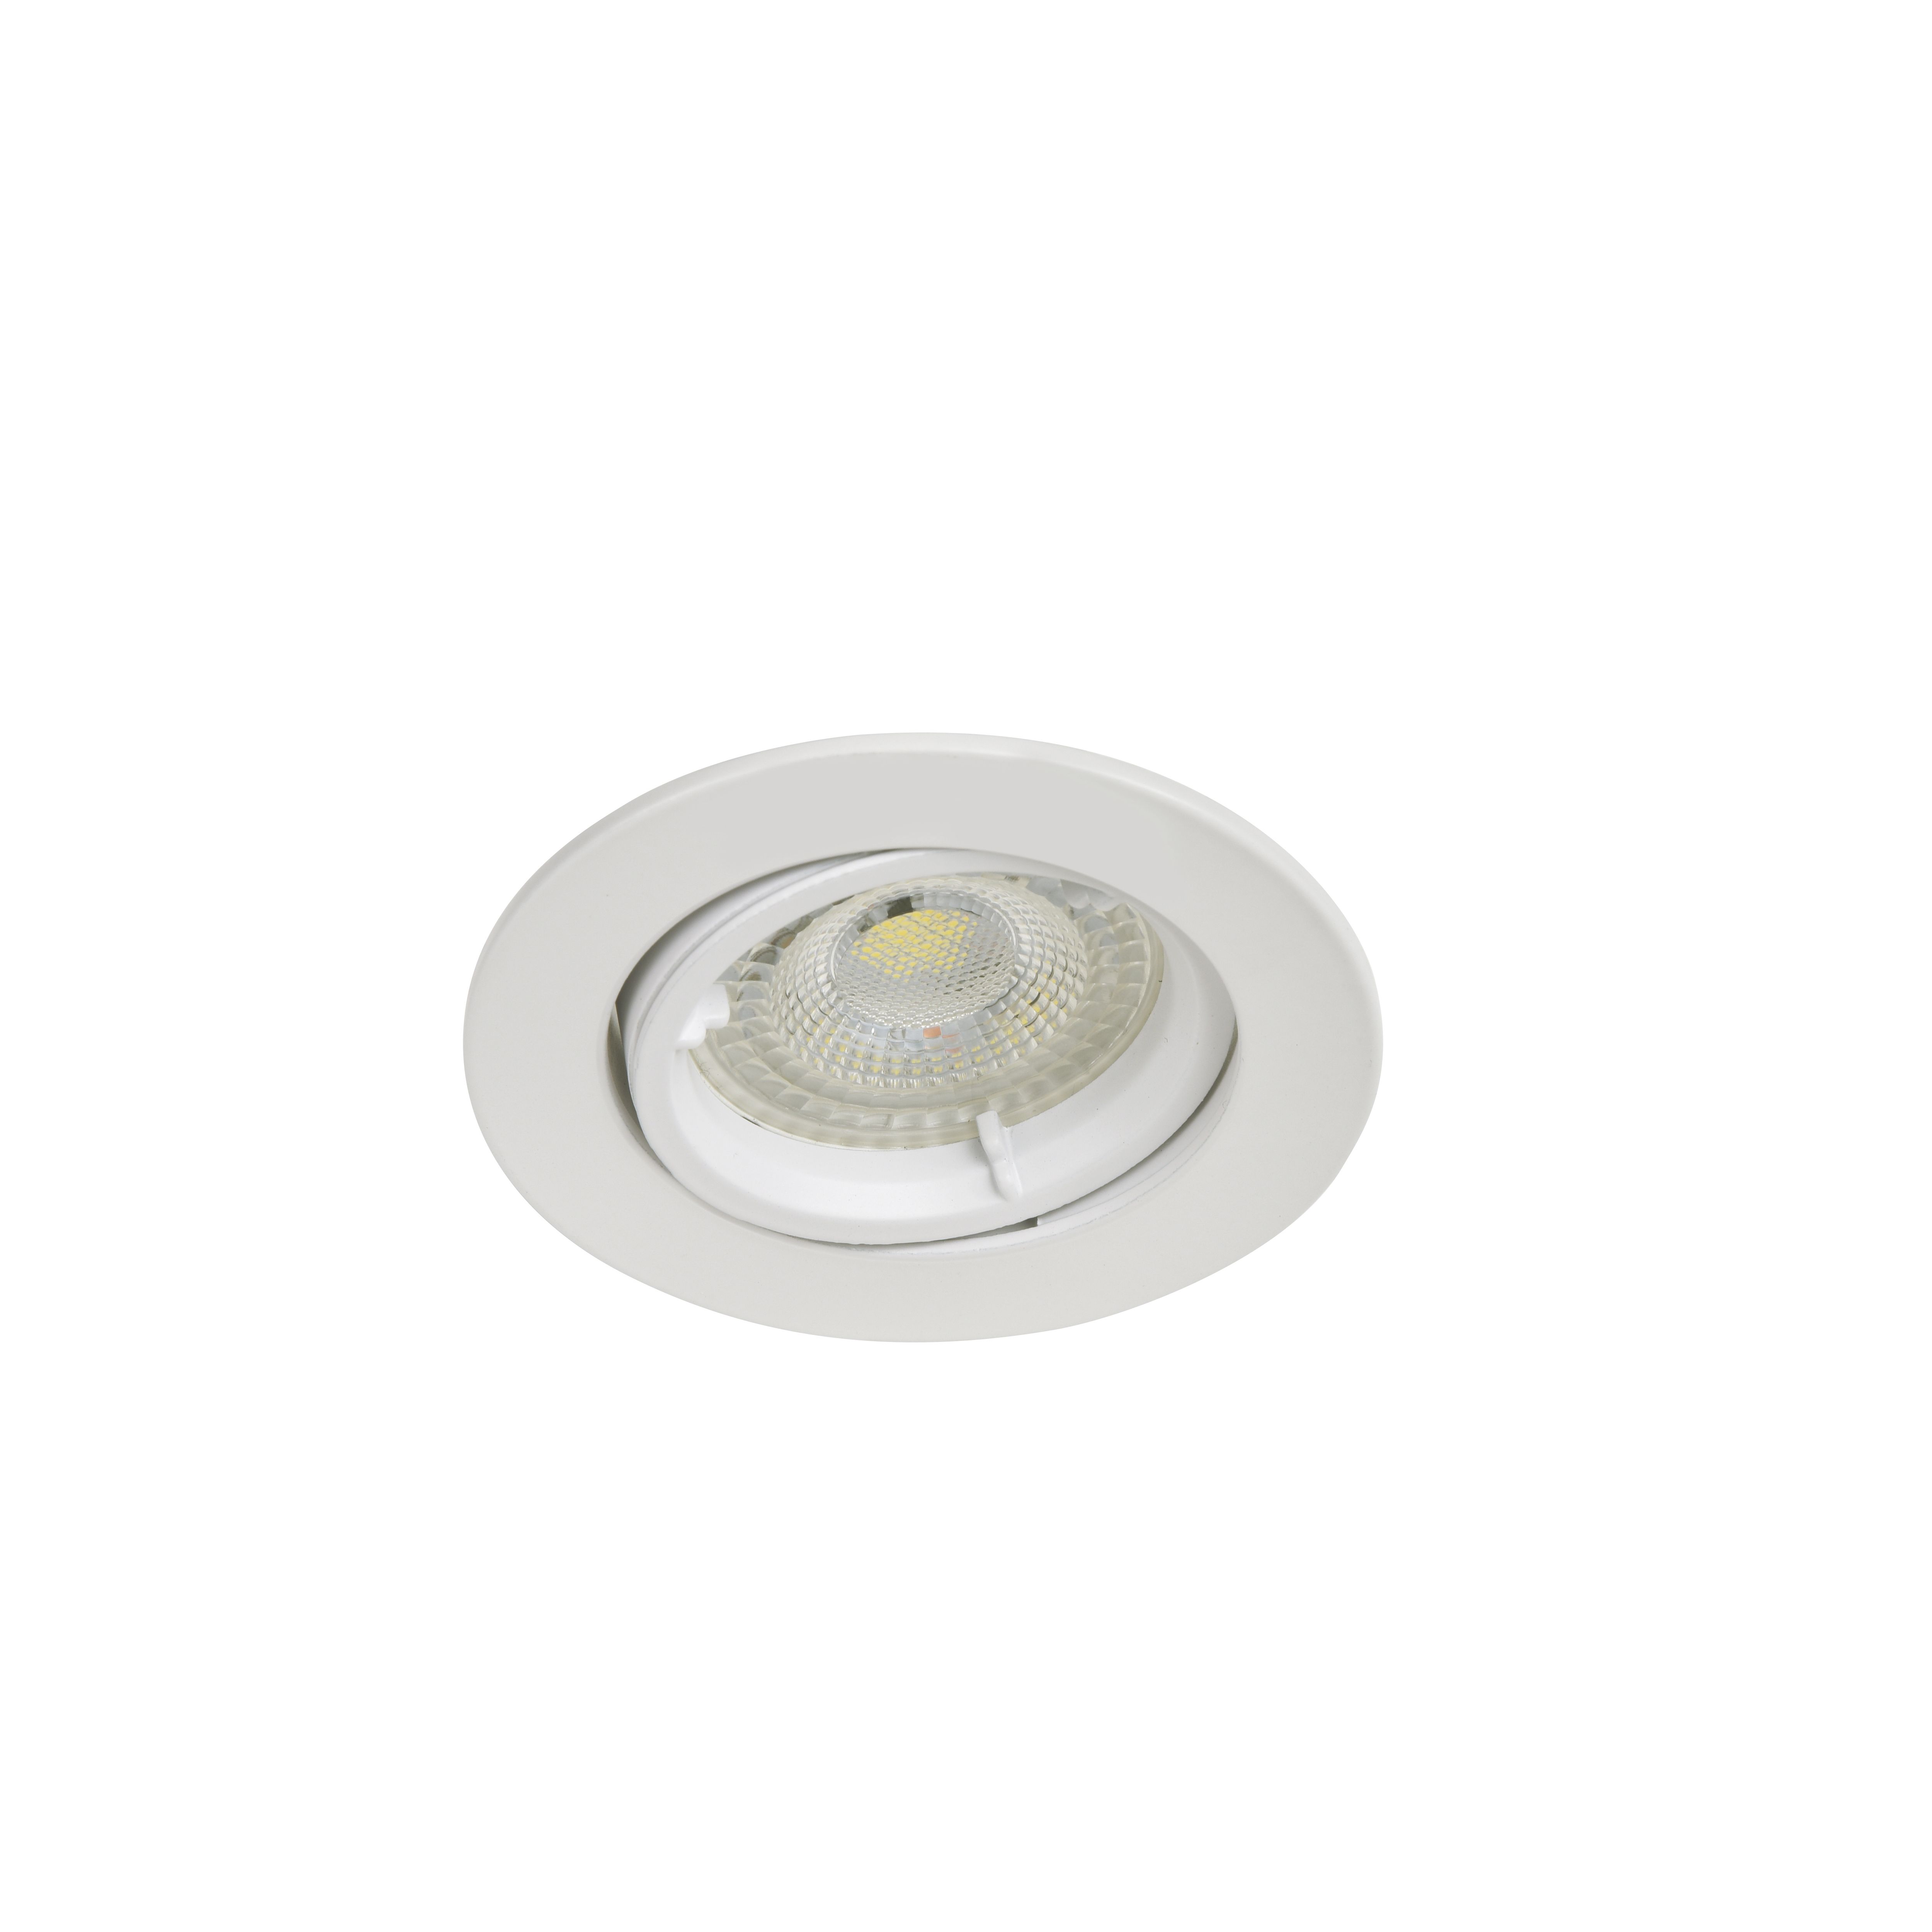 GoodHome Salk White Adjustable LED Warm white Downlight 4.8W IP20, Pack of 3